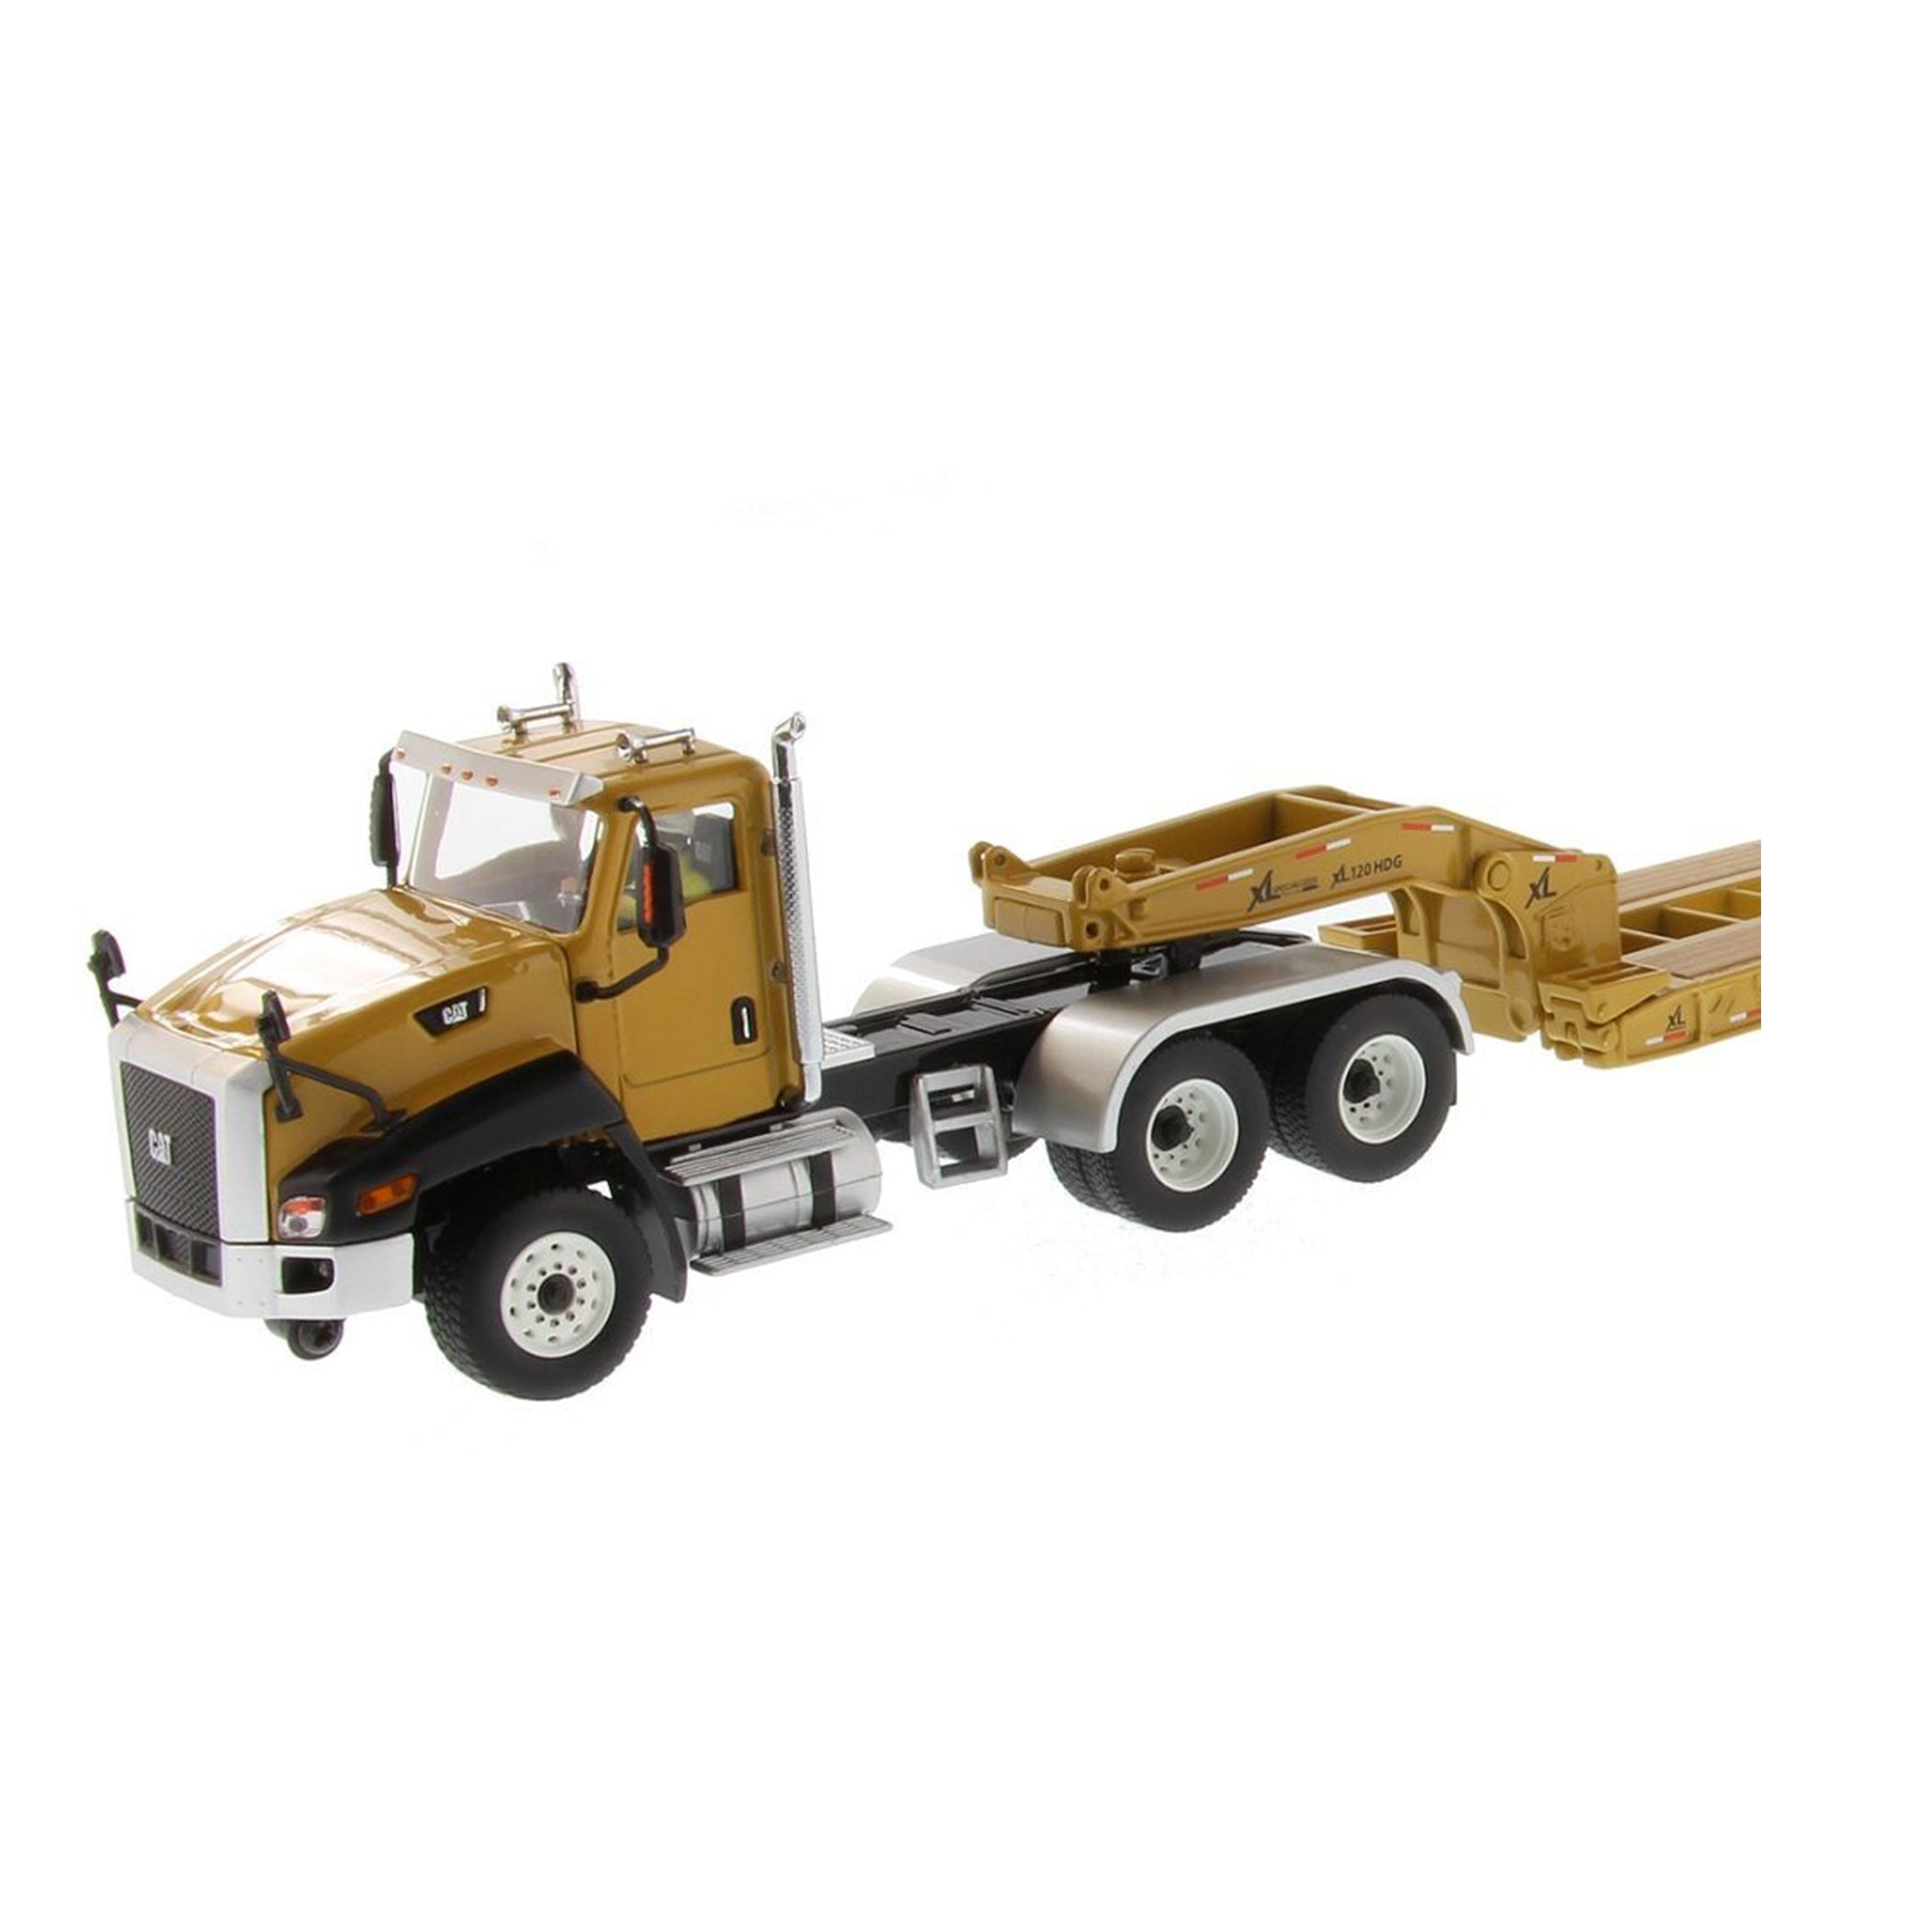 CAT CT660 Day Cab Tractor & XL 120 Low-Profile HDG Trailer 1:50